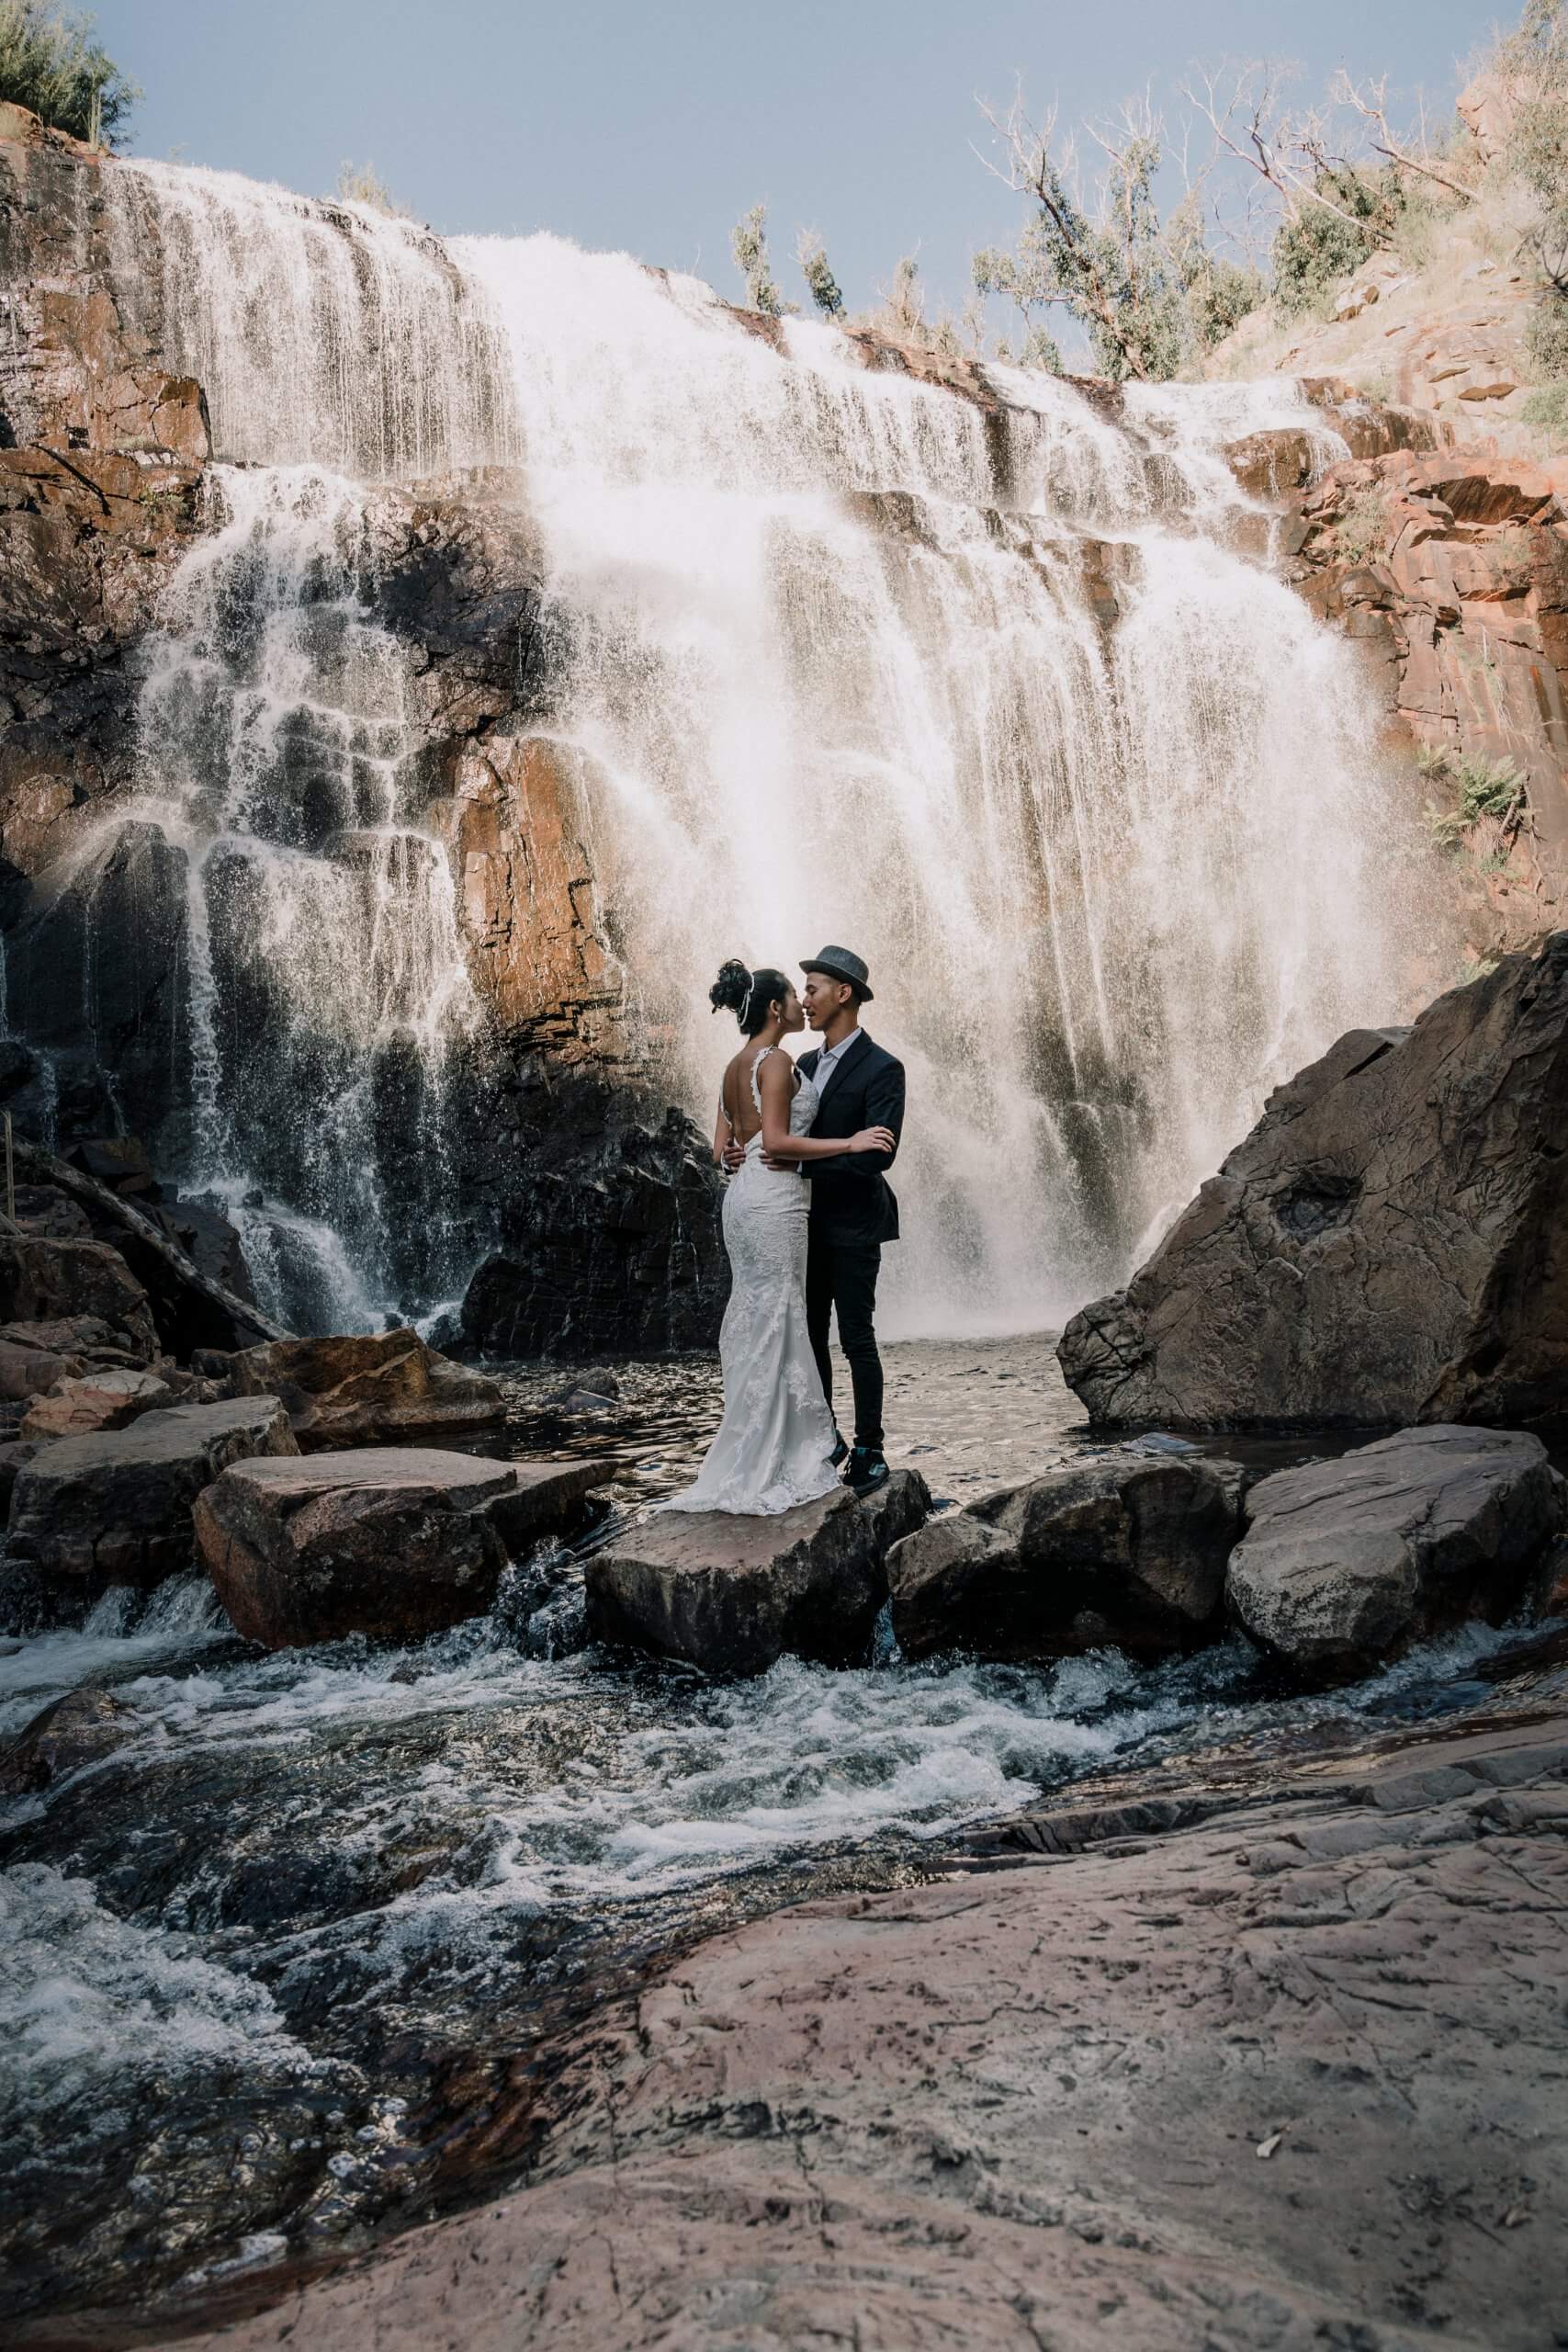 Bride and groom holding each other while standing on a rock in front of a majestic waterfall.